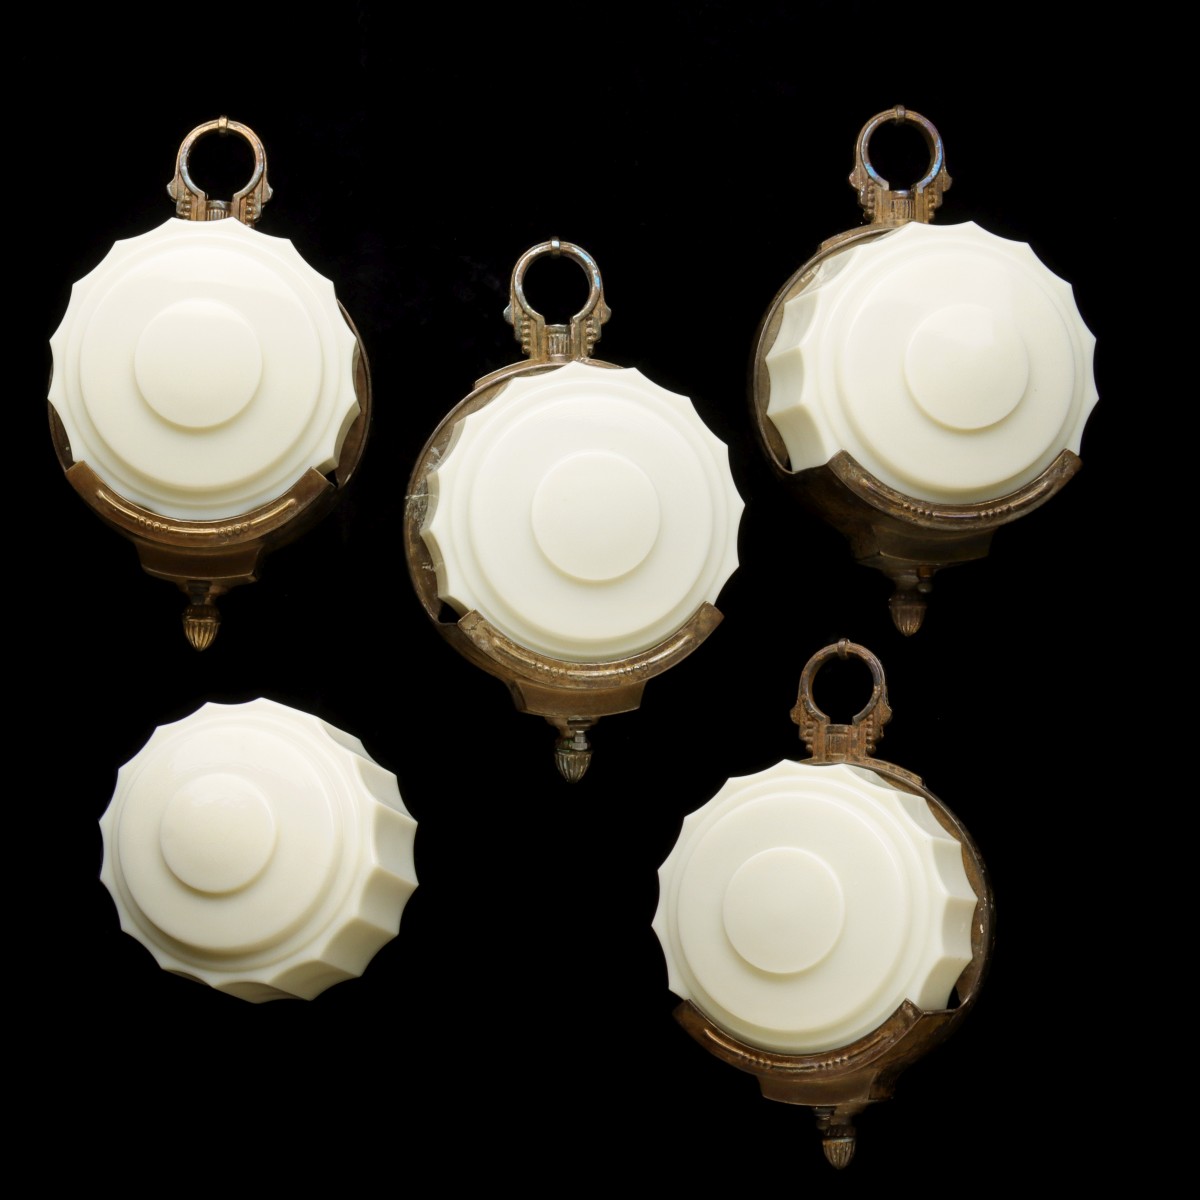 FOUR EARLY 20TH C. WALL LIGHTS WITH CUSTARD GLASS